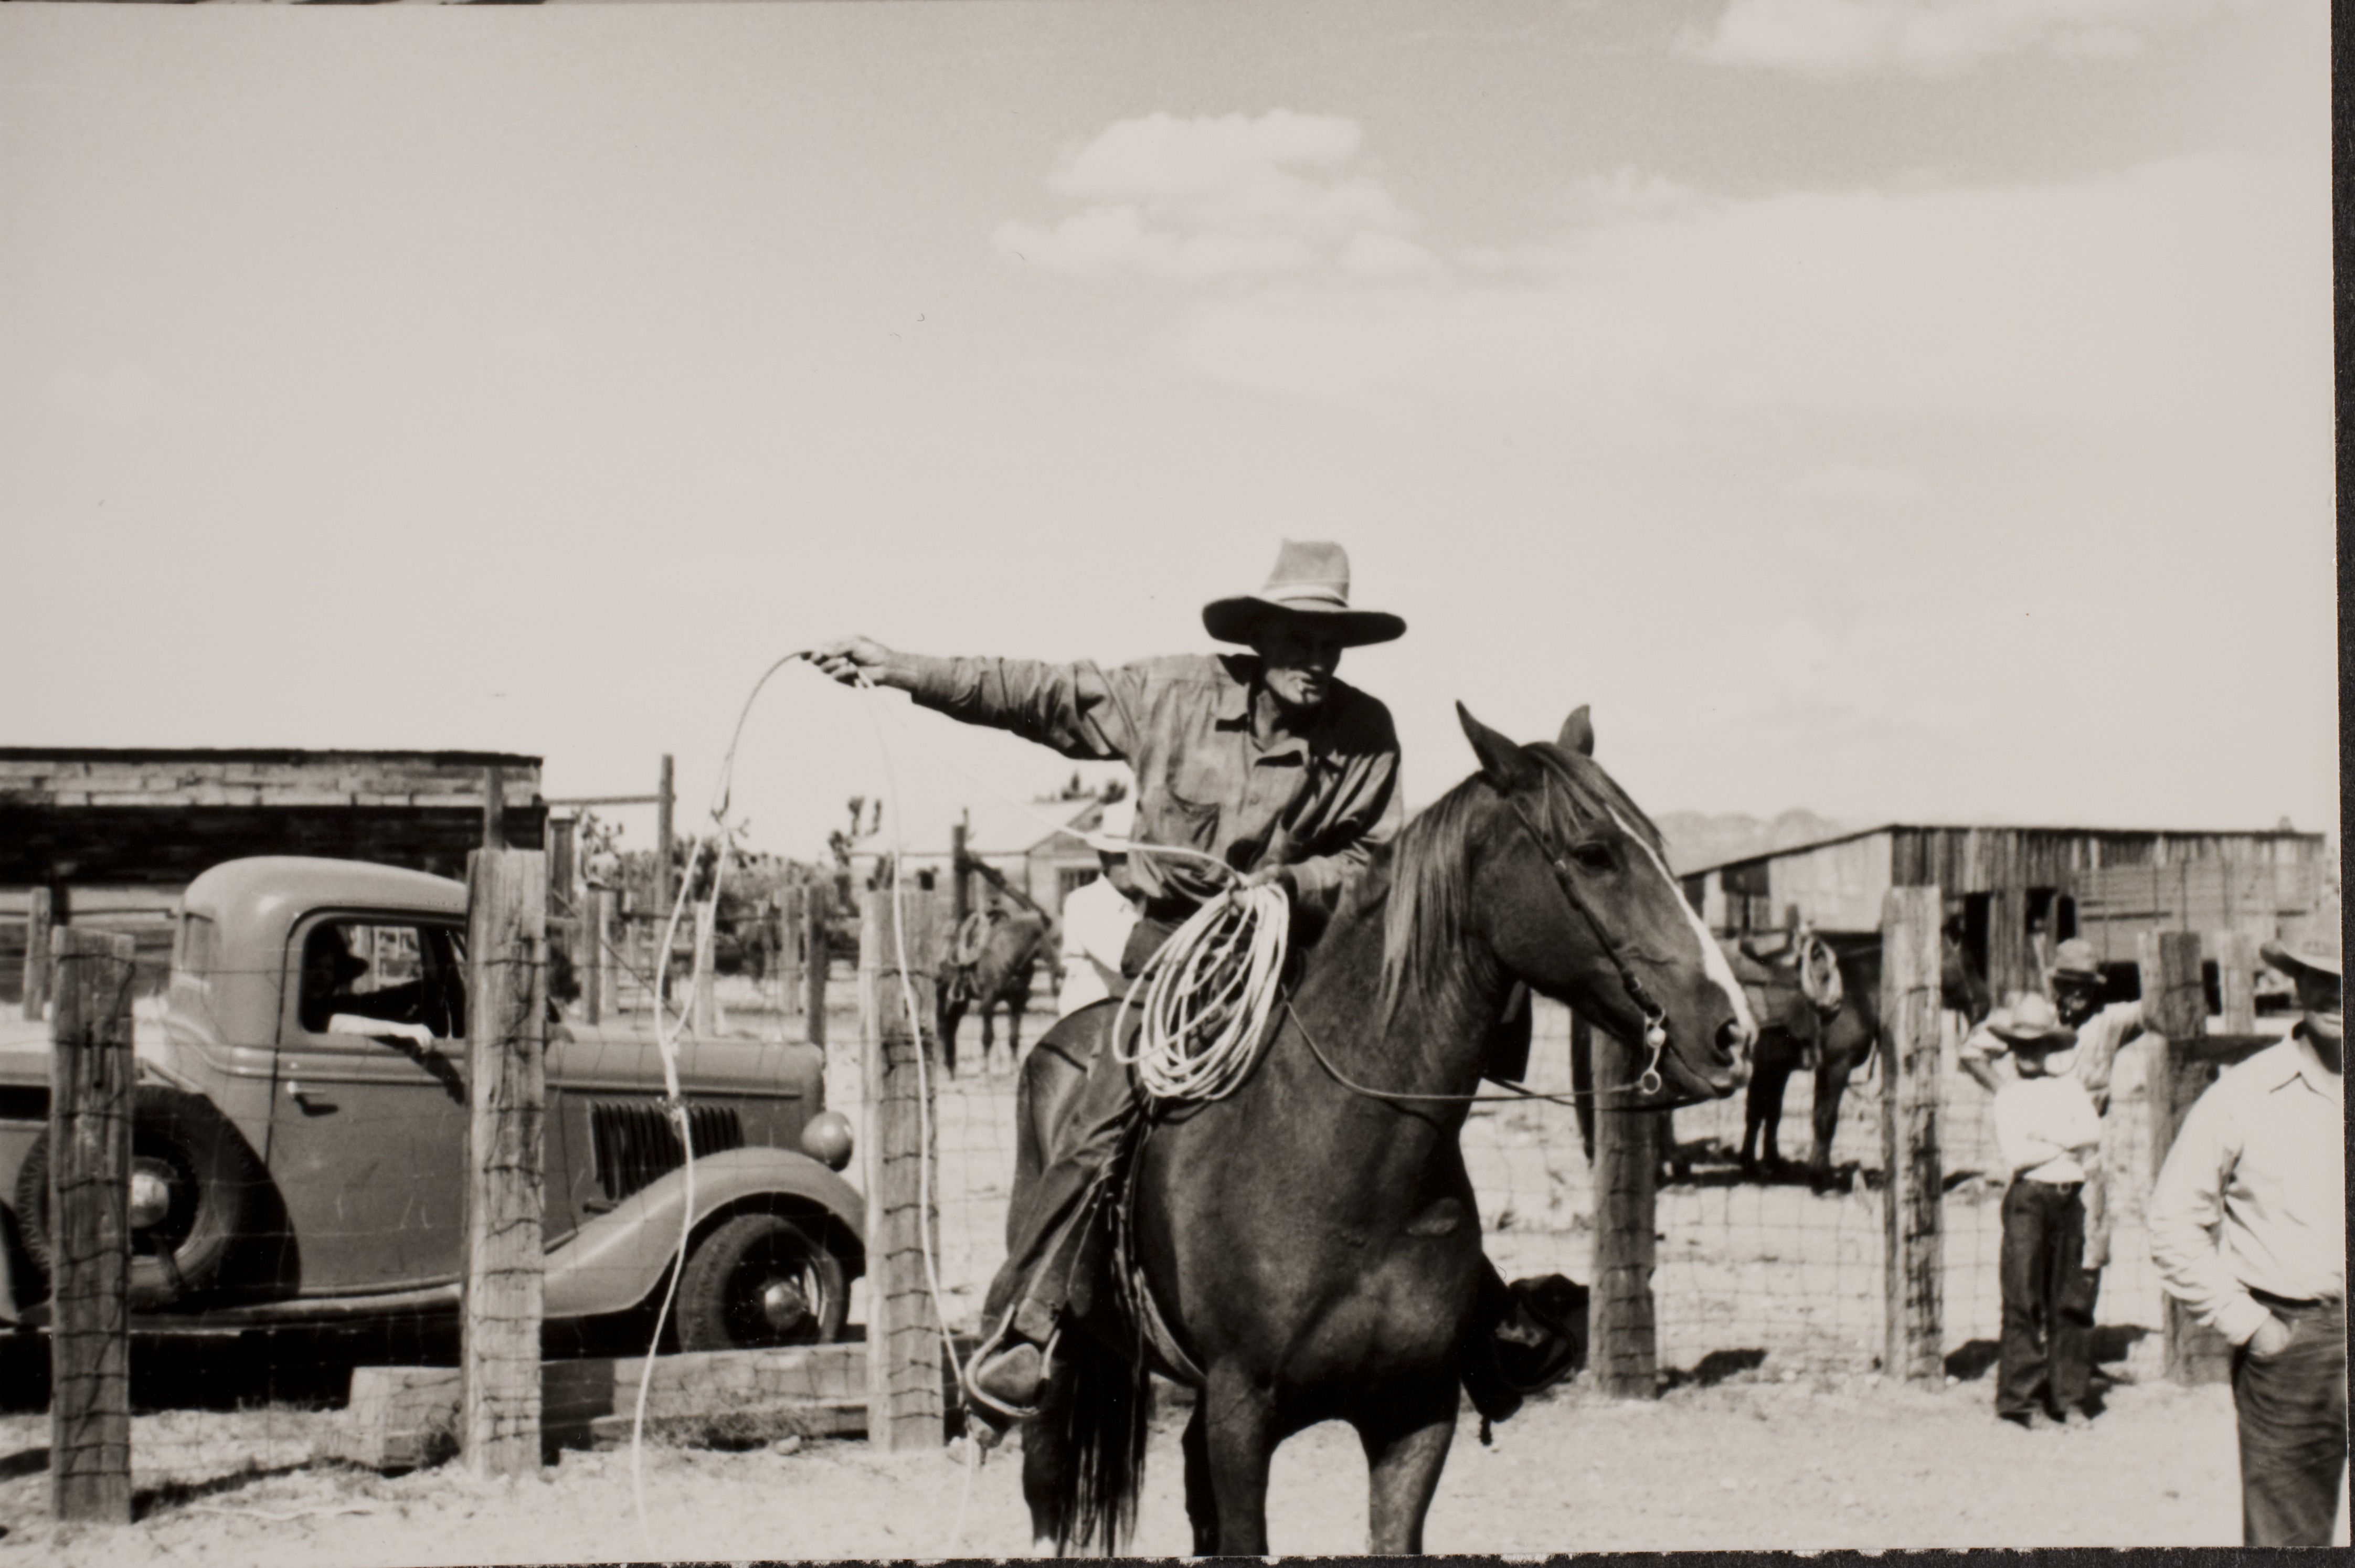 Unidentified people and cowboys on horseback at Walking Box Ranch: photographic print